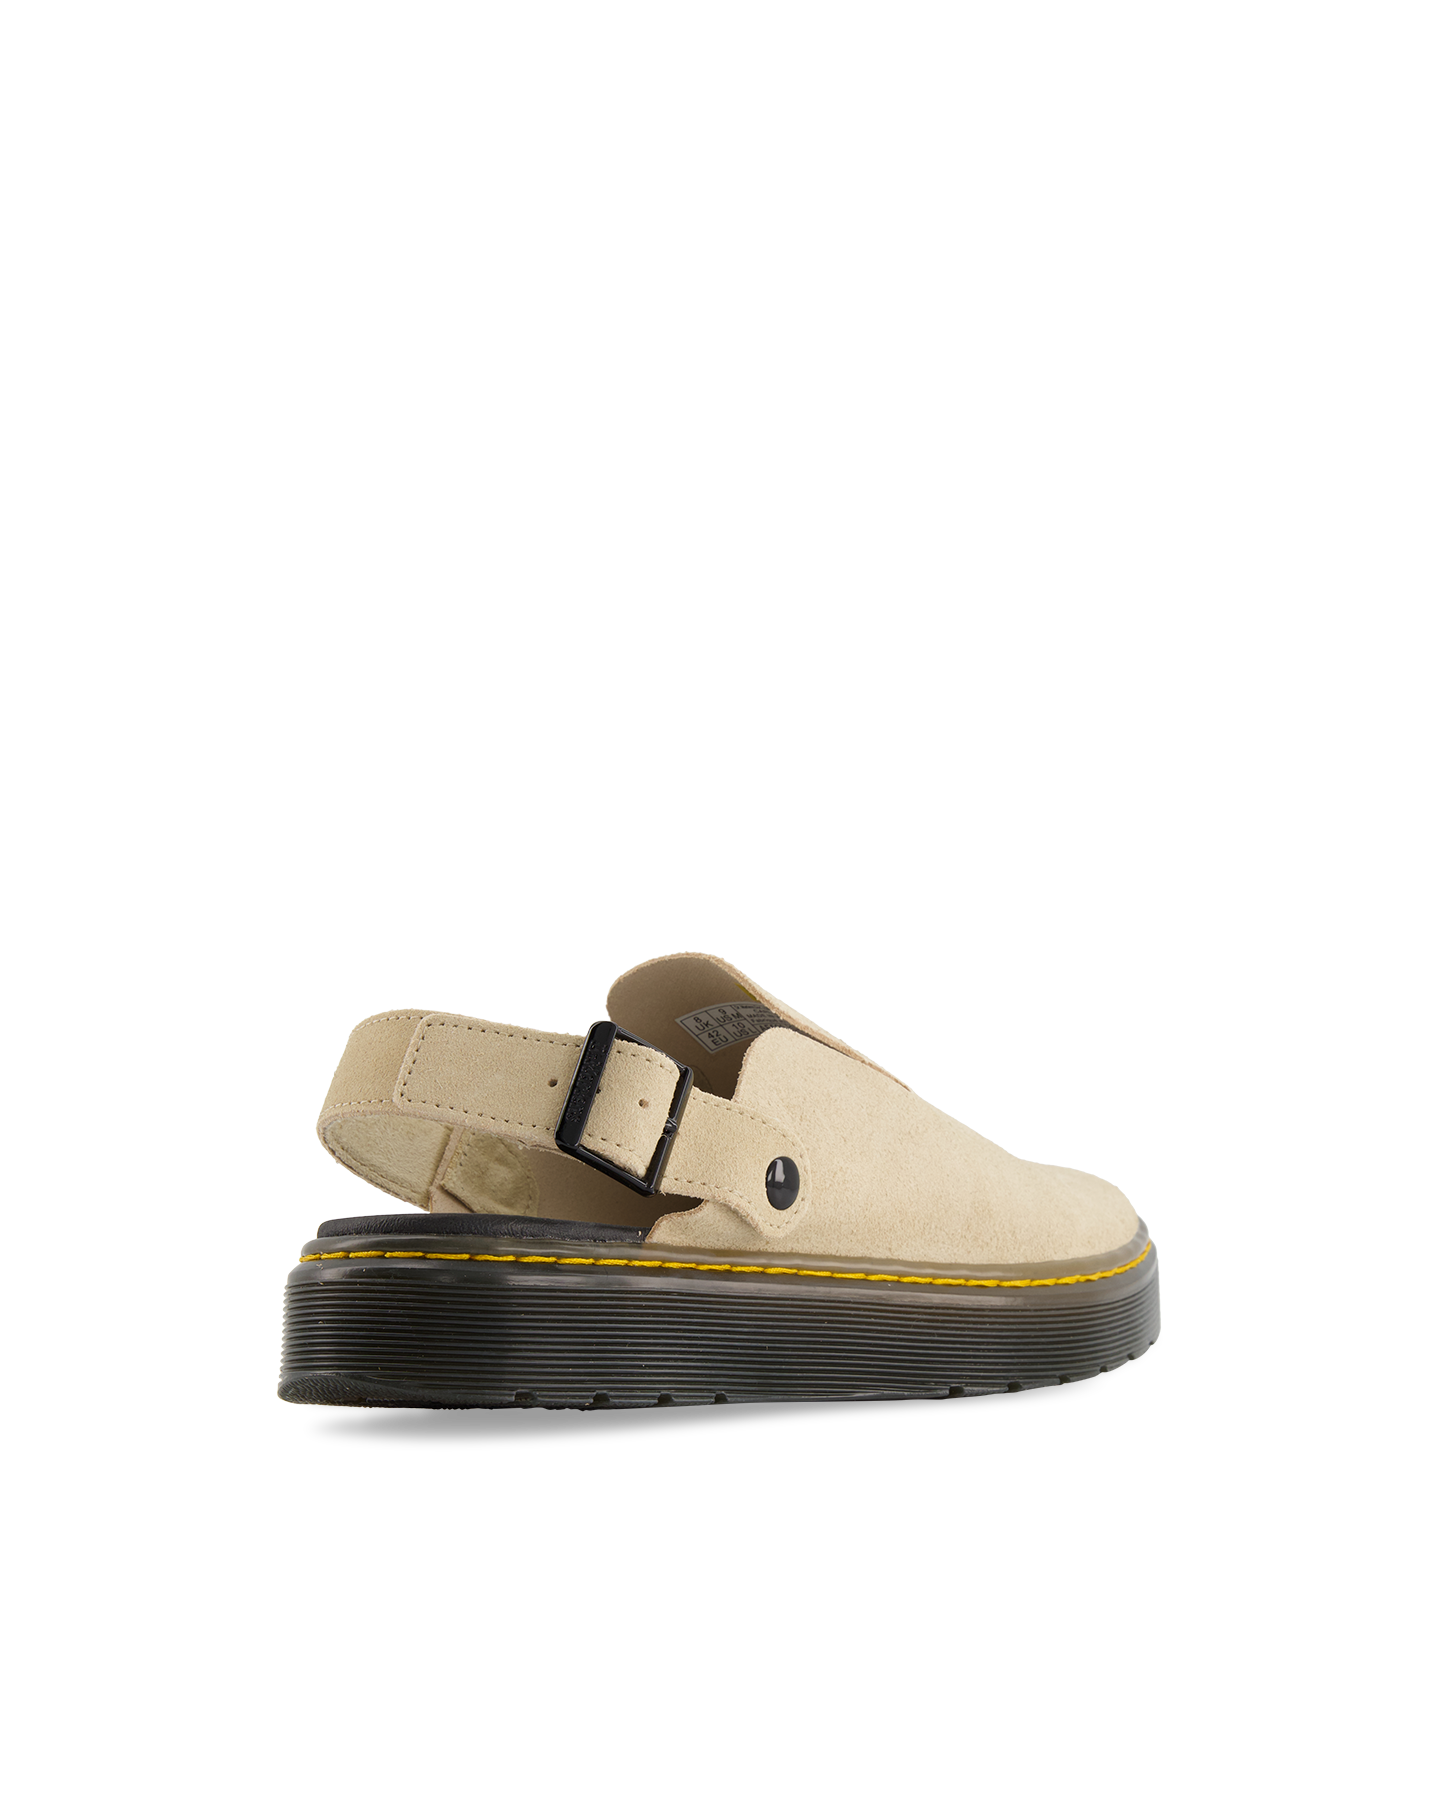 Dr Martens Carlson Warm Sand E H Suede Mb GEEL 3